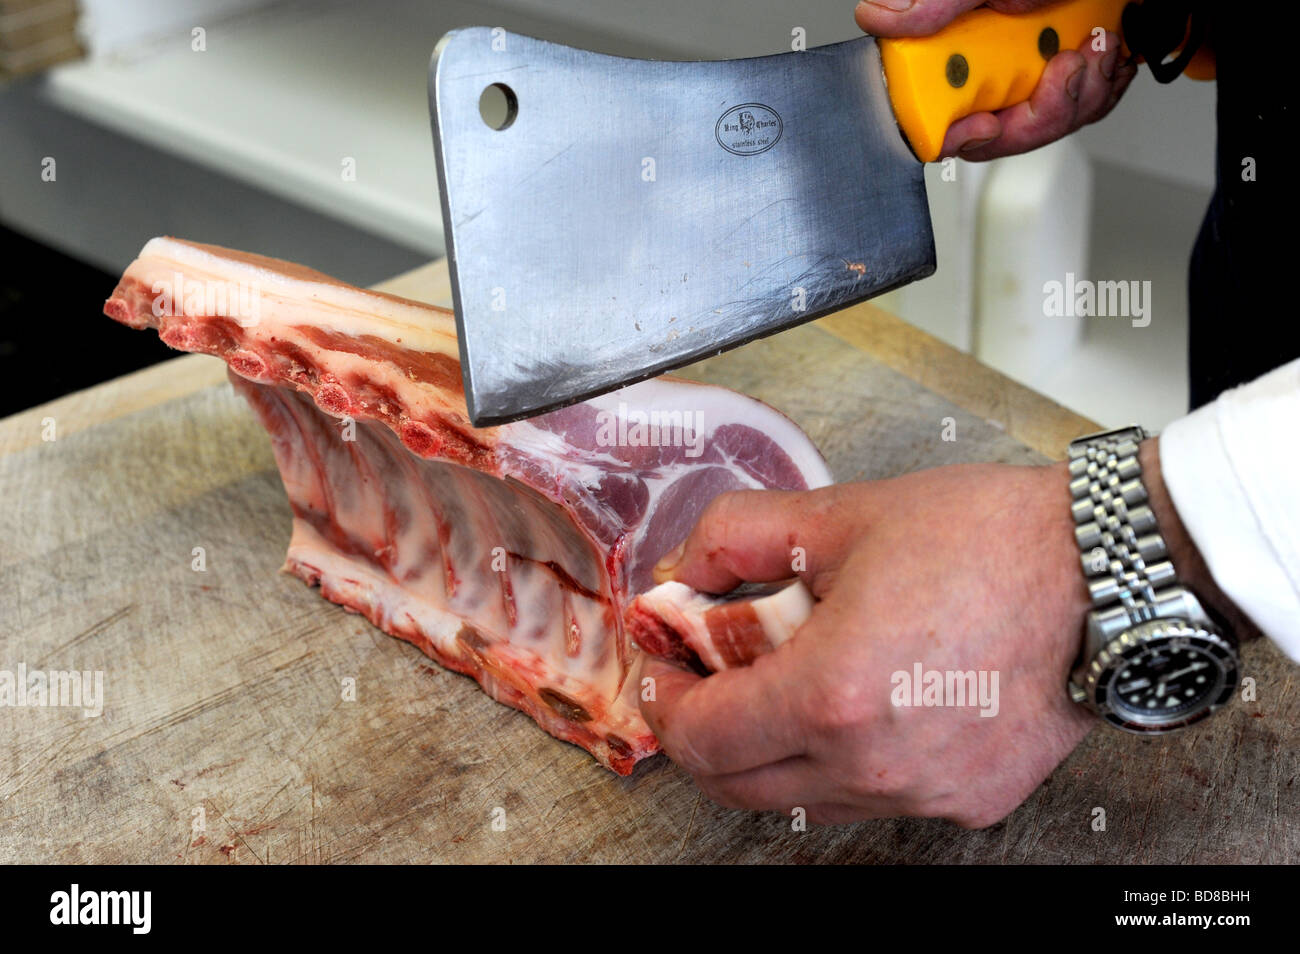 A butcher cuts some pork chops at Bramptons a traditional butchers in Kemp Town Brighton Stock Photo